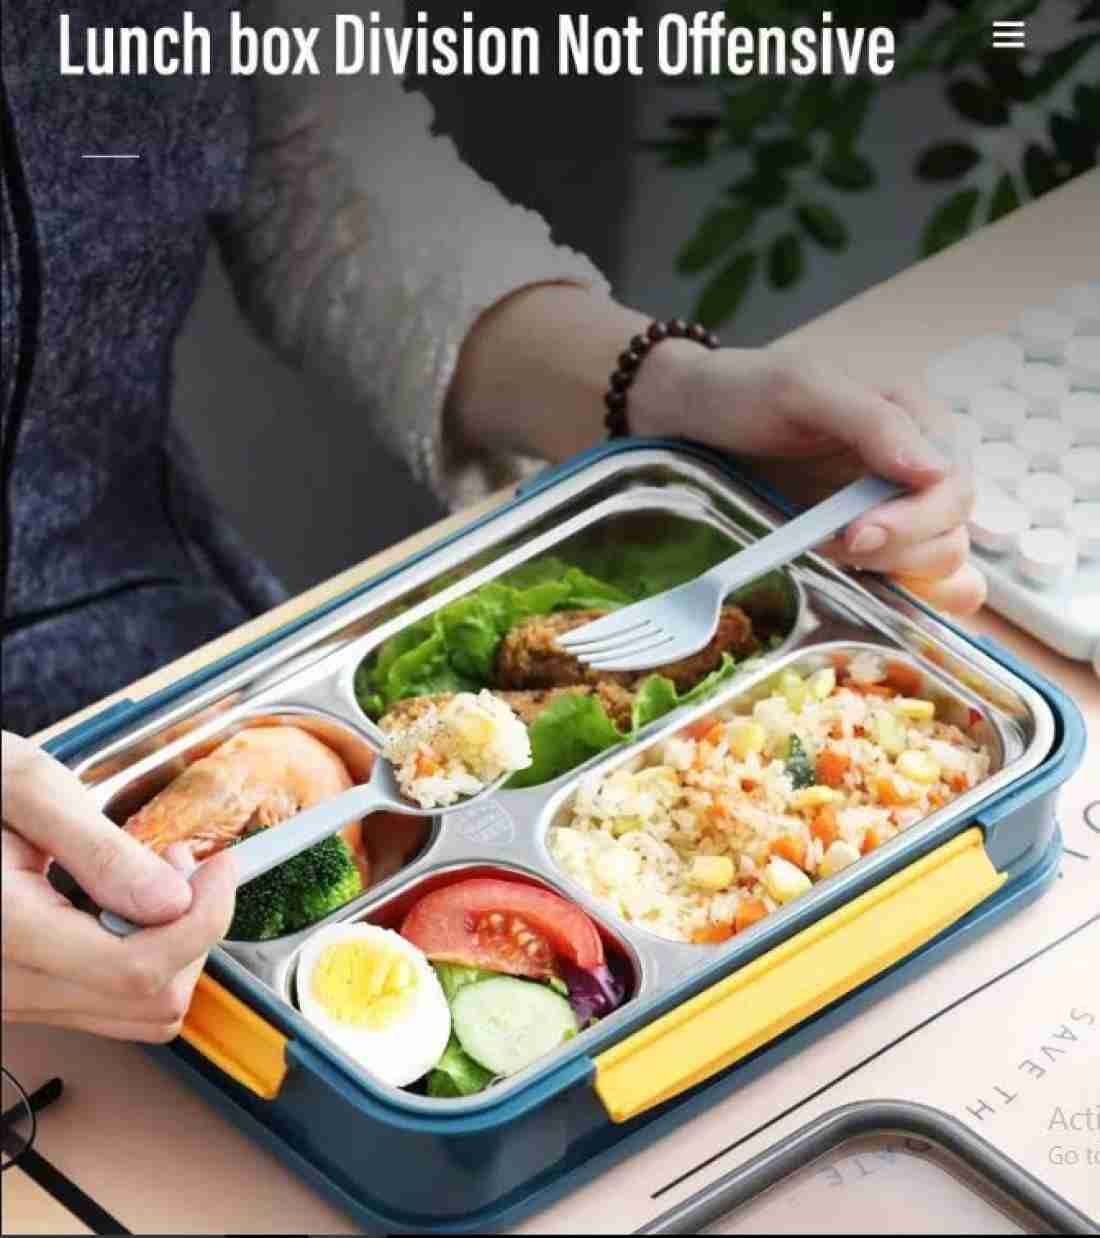 https://rukminim2.flixcart.com/image/1100/1300/l3khsi80/lunch-box/p/x/6/1100-4-compartment-stainless-steel-lunch-boxes-tiffin-box-for-original-imagent75udgpdad.jpeg?q=20